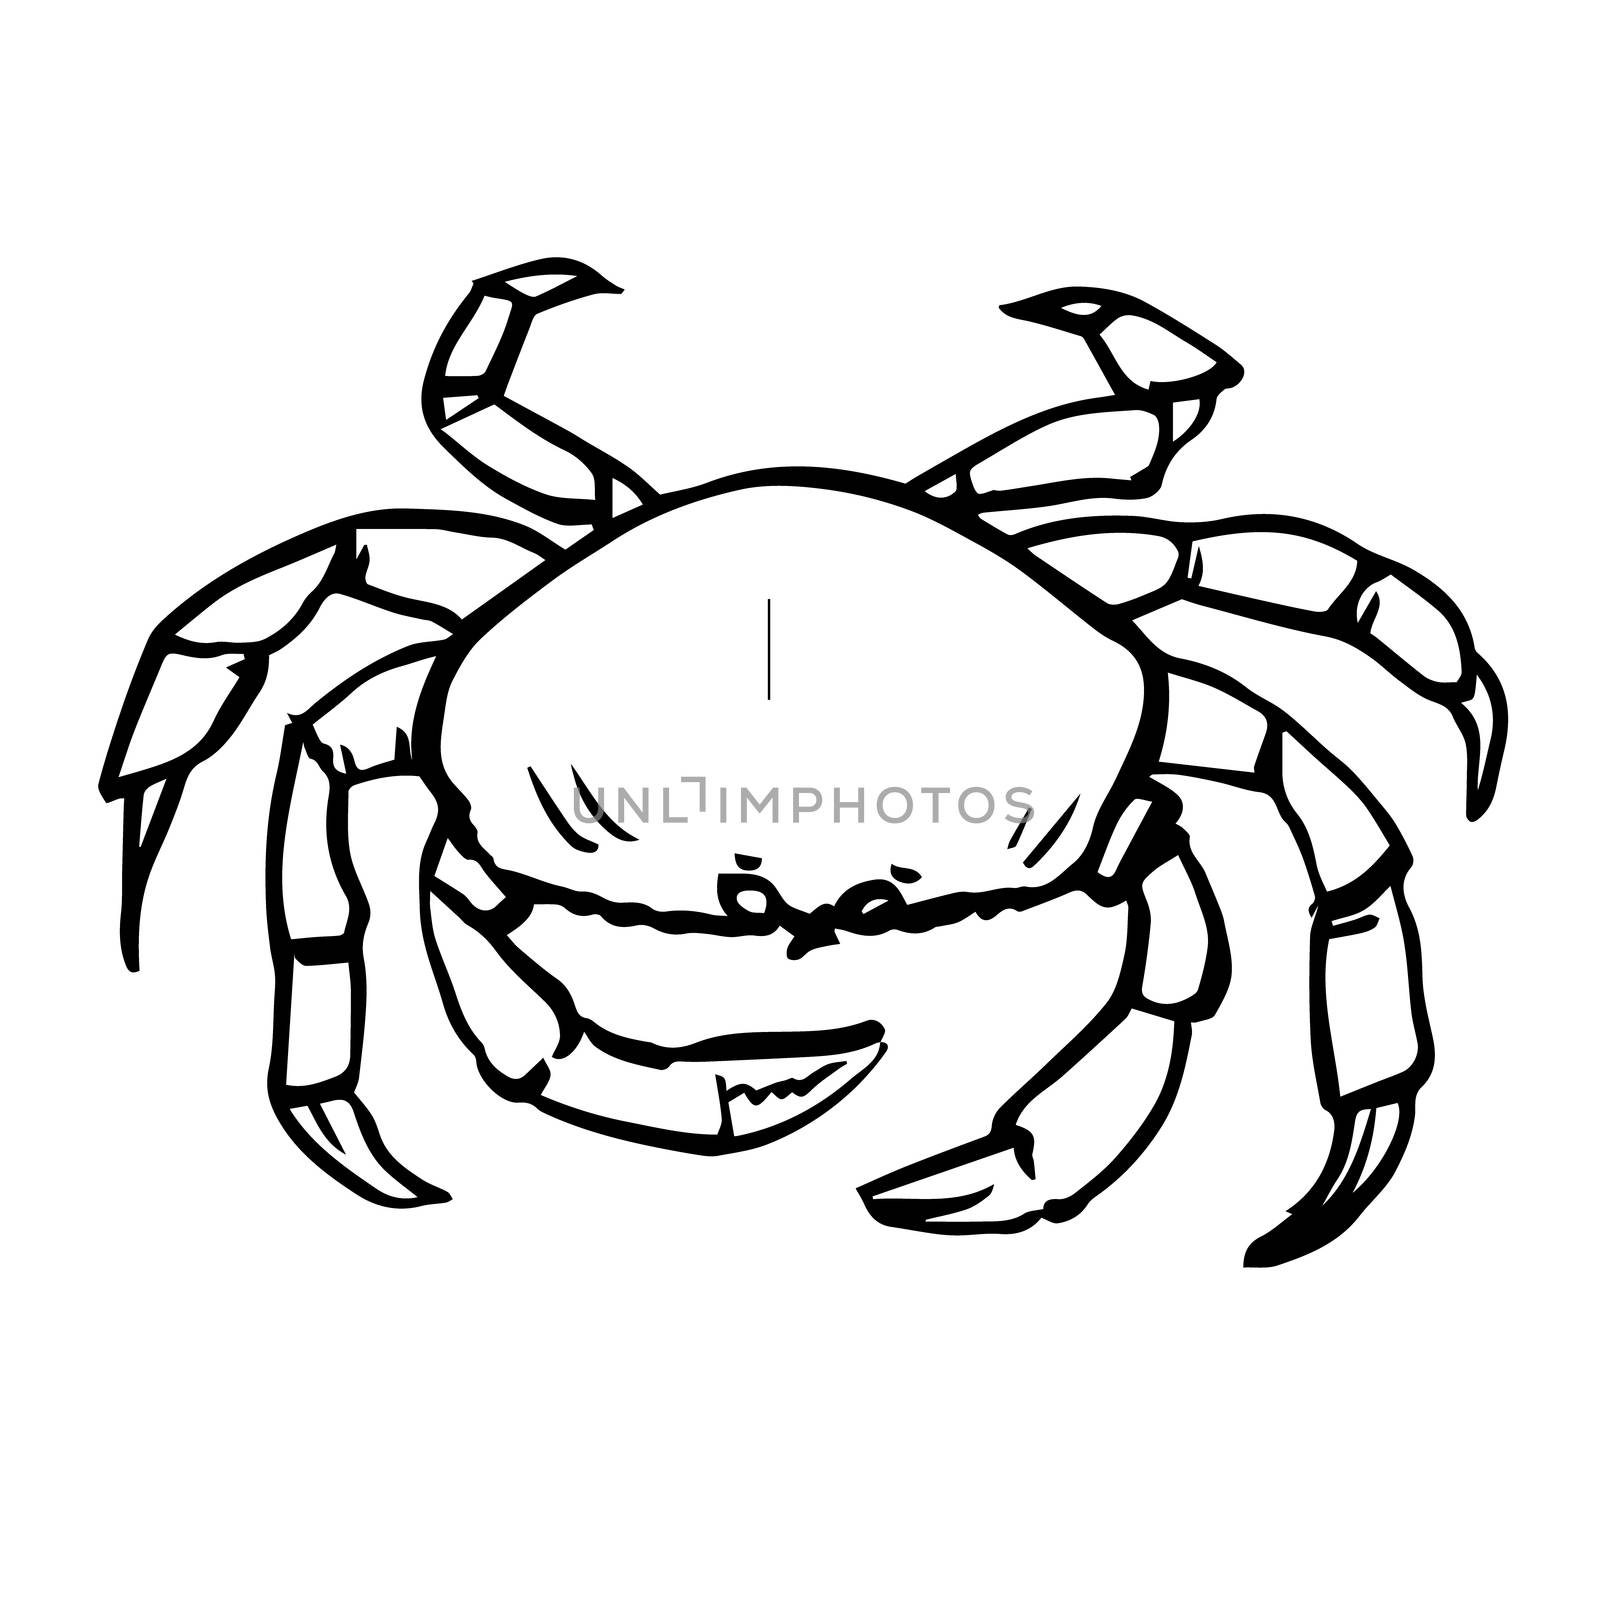 freehand sketch illustration of crab, doodle hand drawn